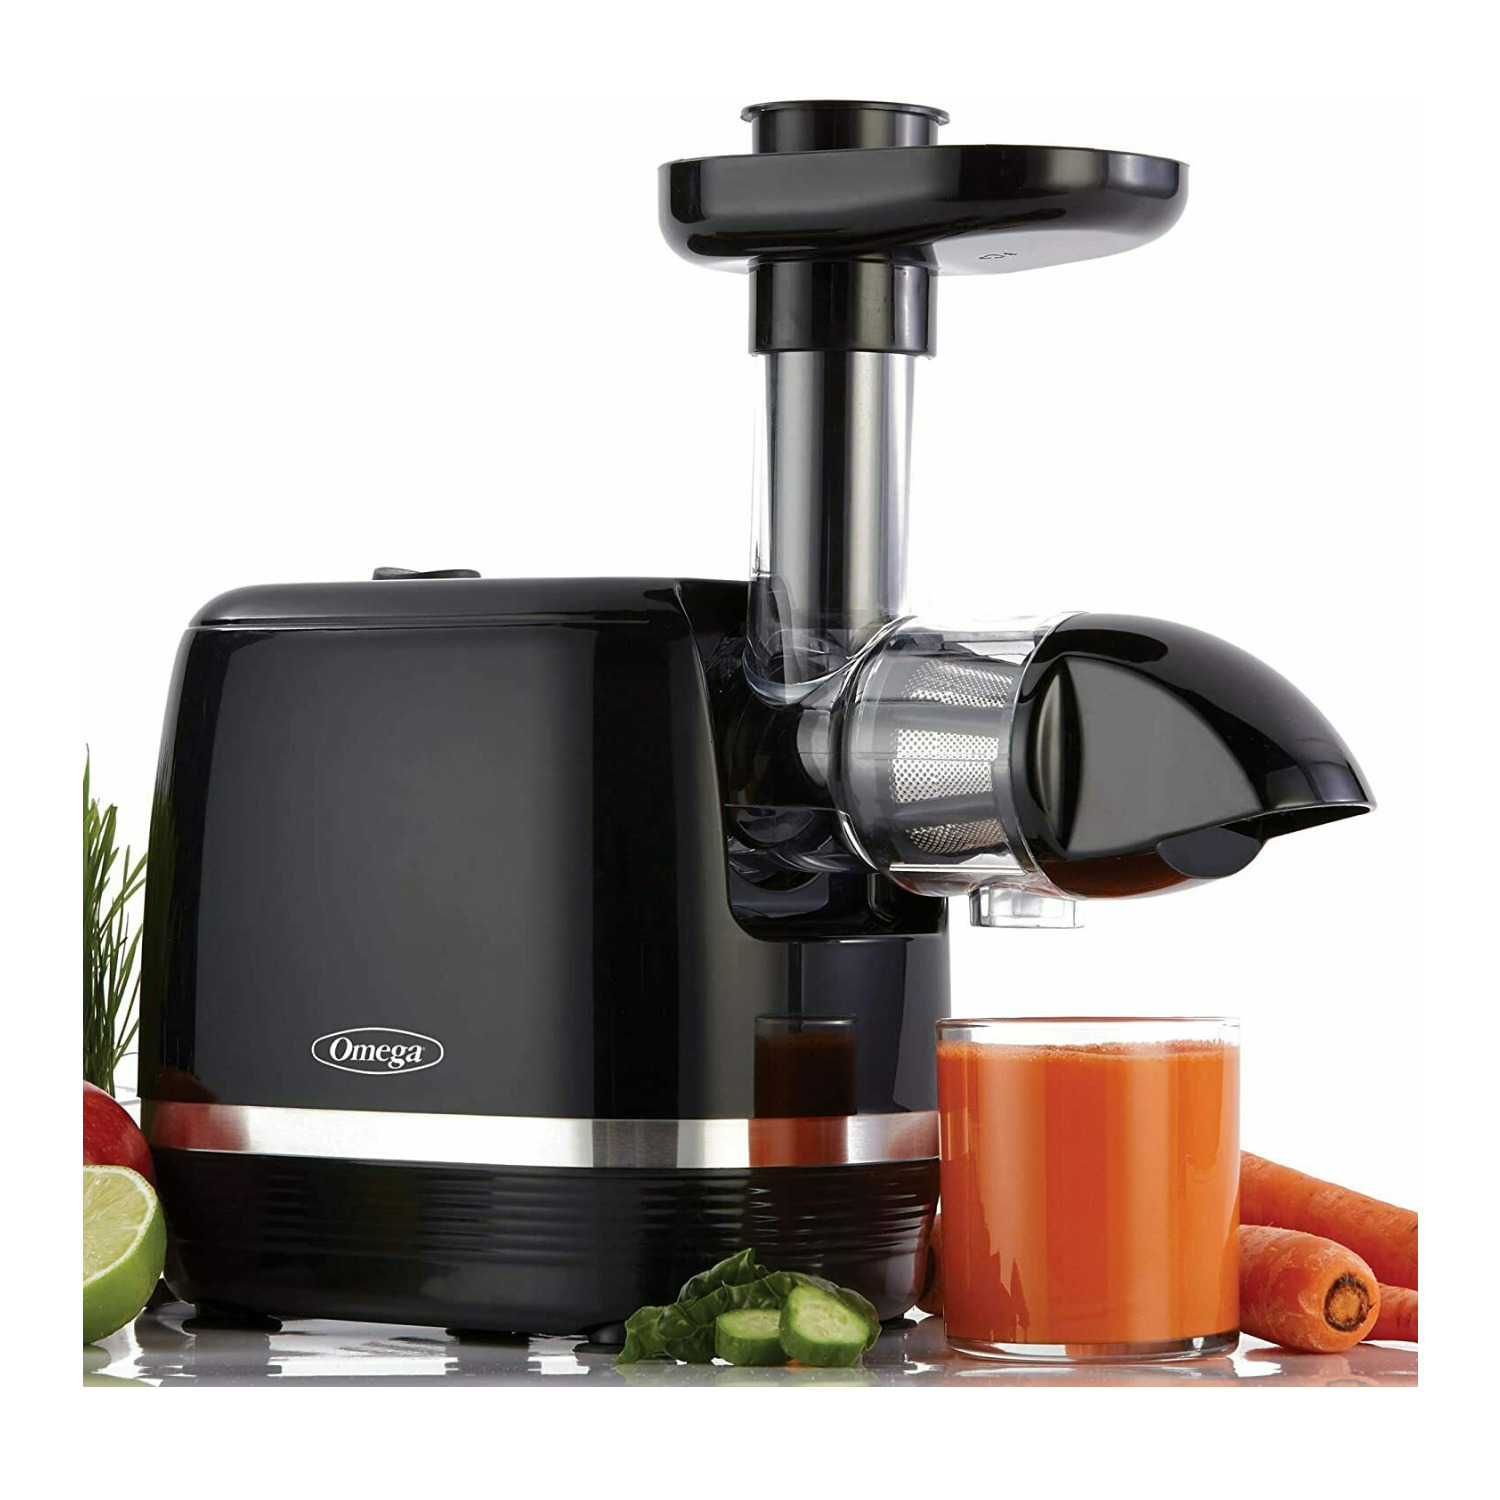 Omega H3000D Cold Press 365 Juicer Slow Masticating Extractor Creates Delicious Fruit Vegetable and Leafy Green High Juice Yield